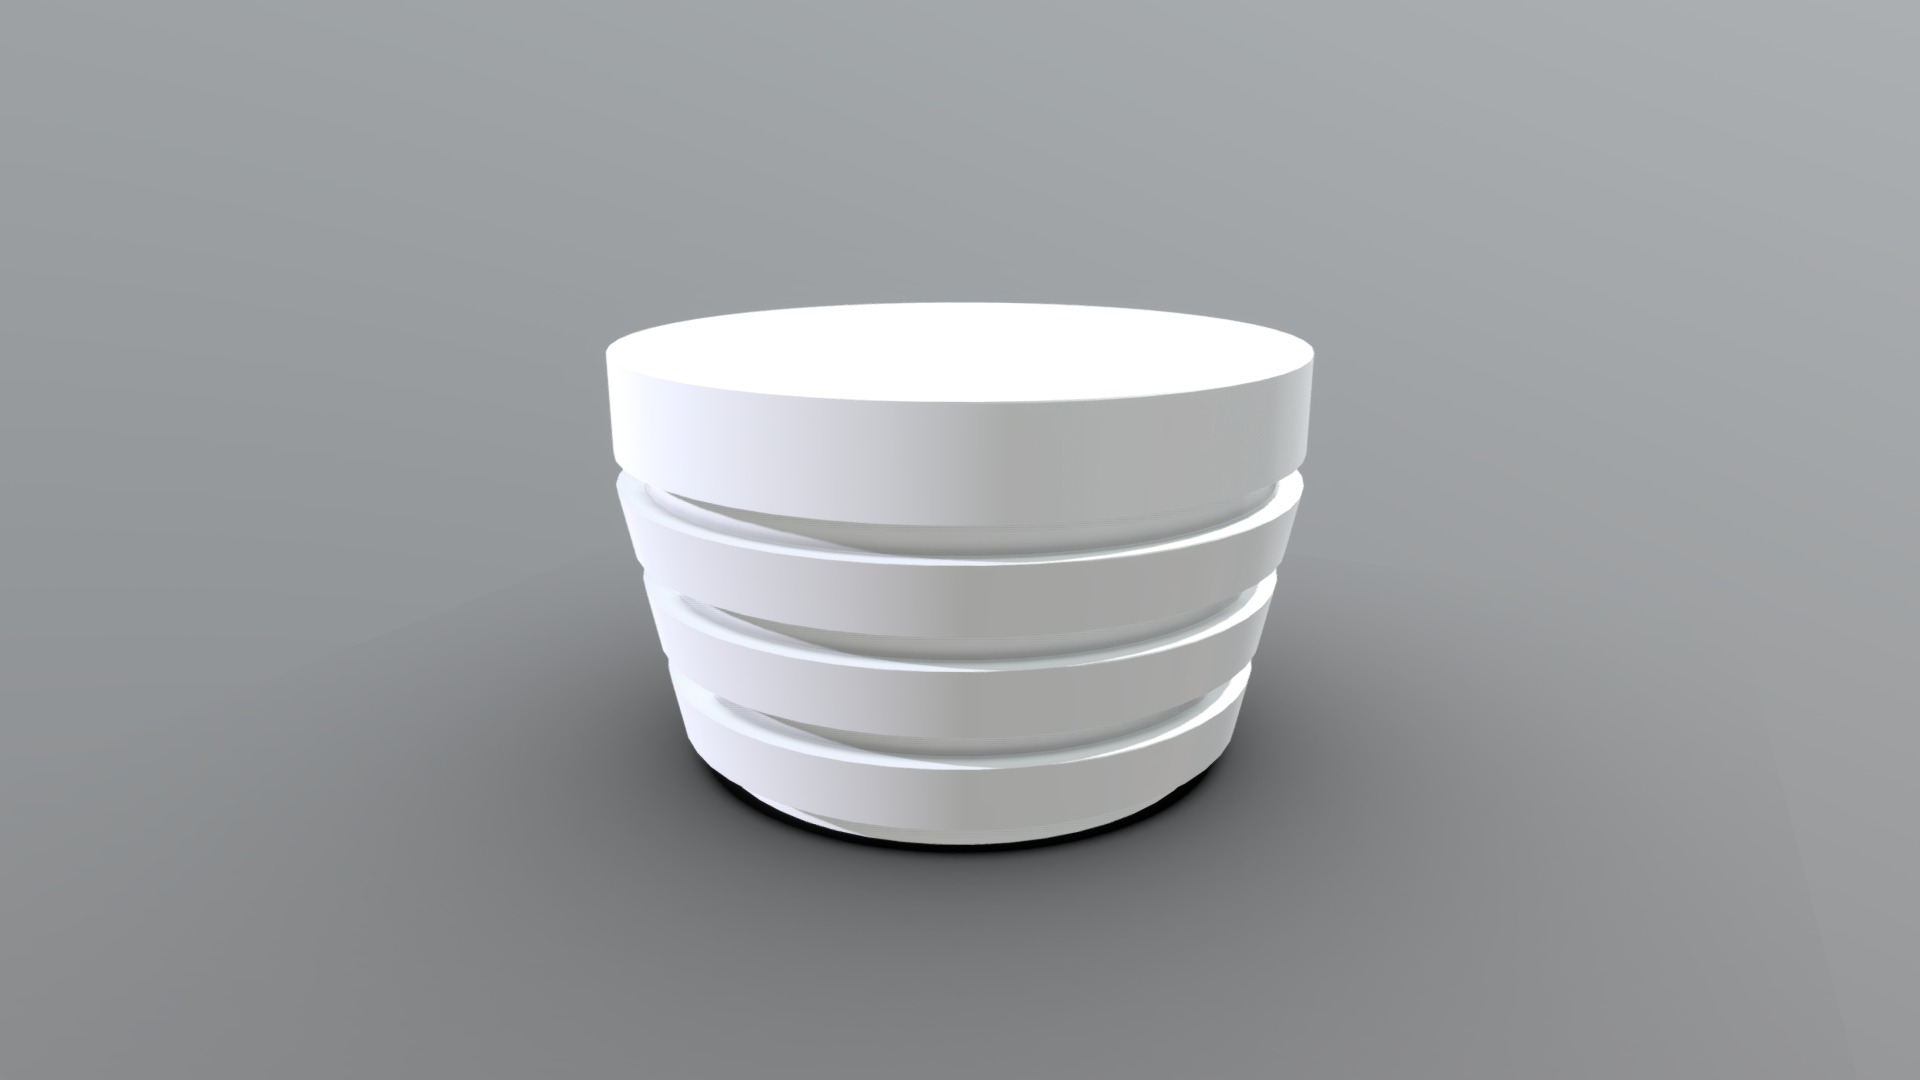 3D model Guggenheim Table - This is a 3D model of the Guggenheim Table. The 3D model is about a white bowl on a white surface.